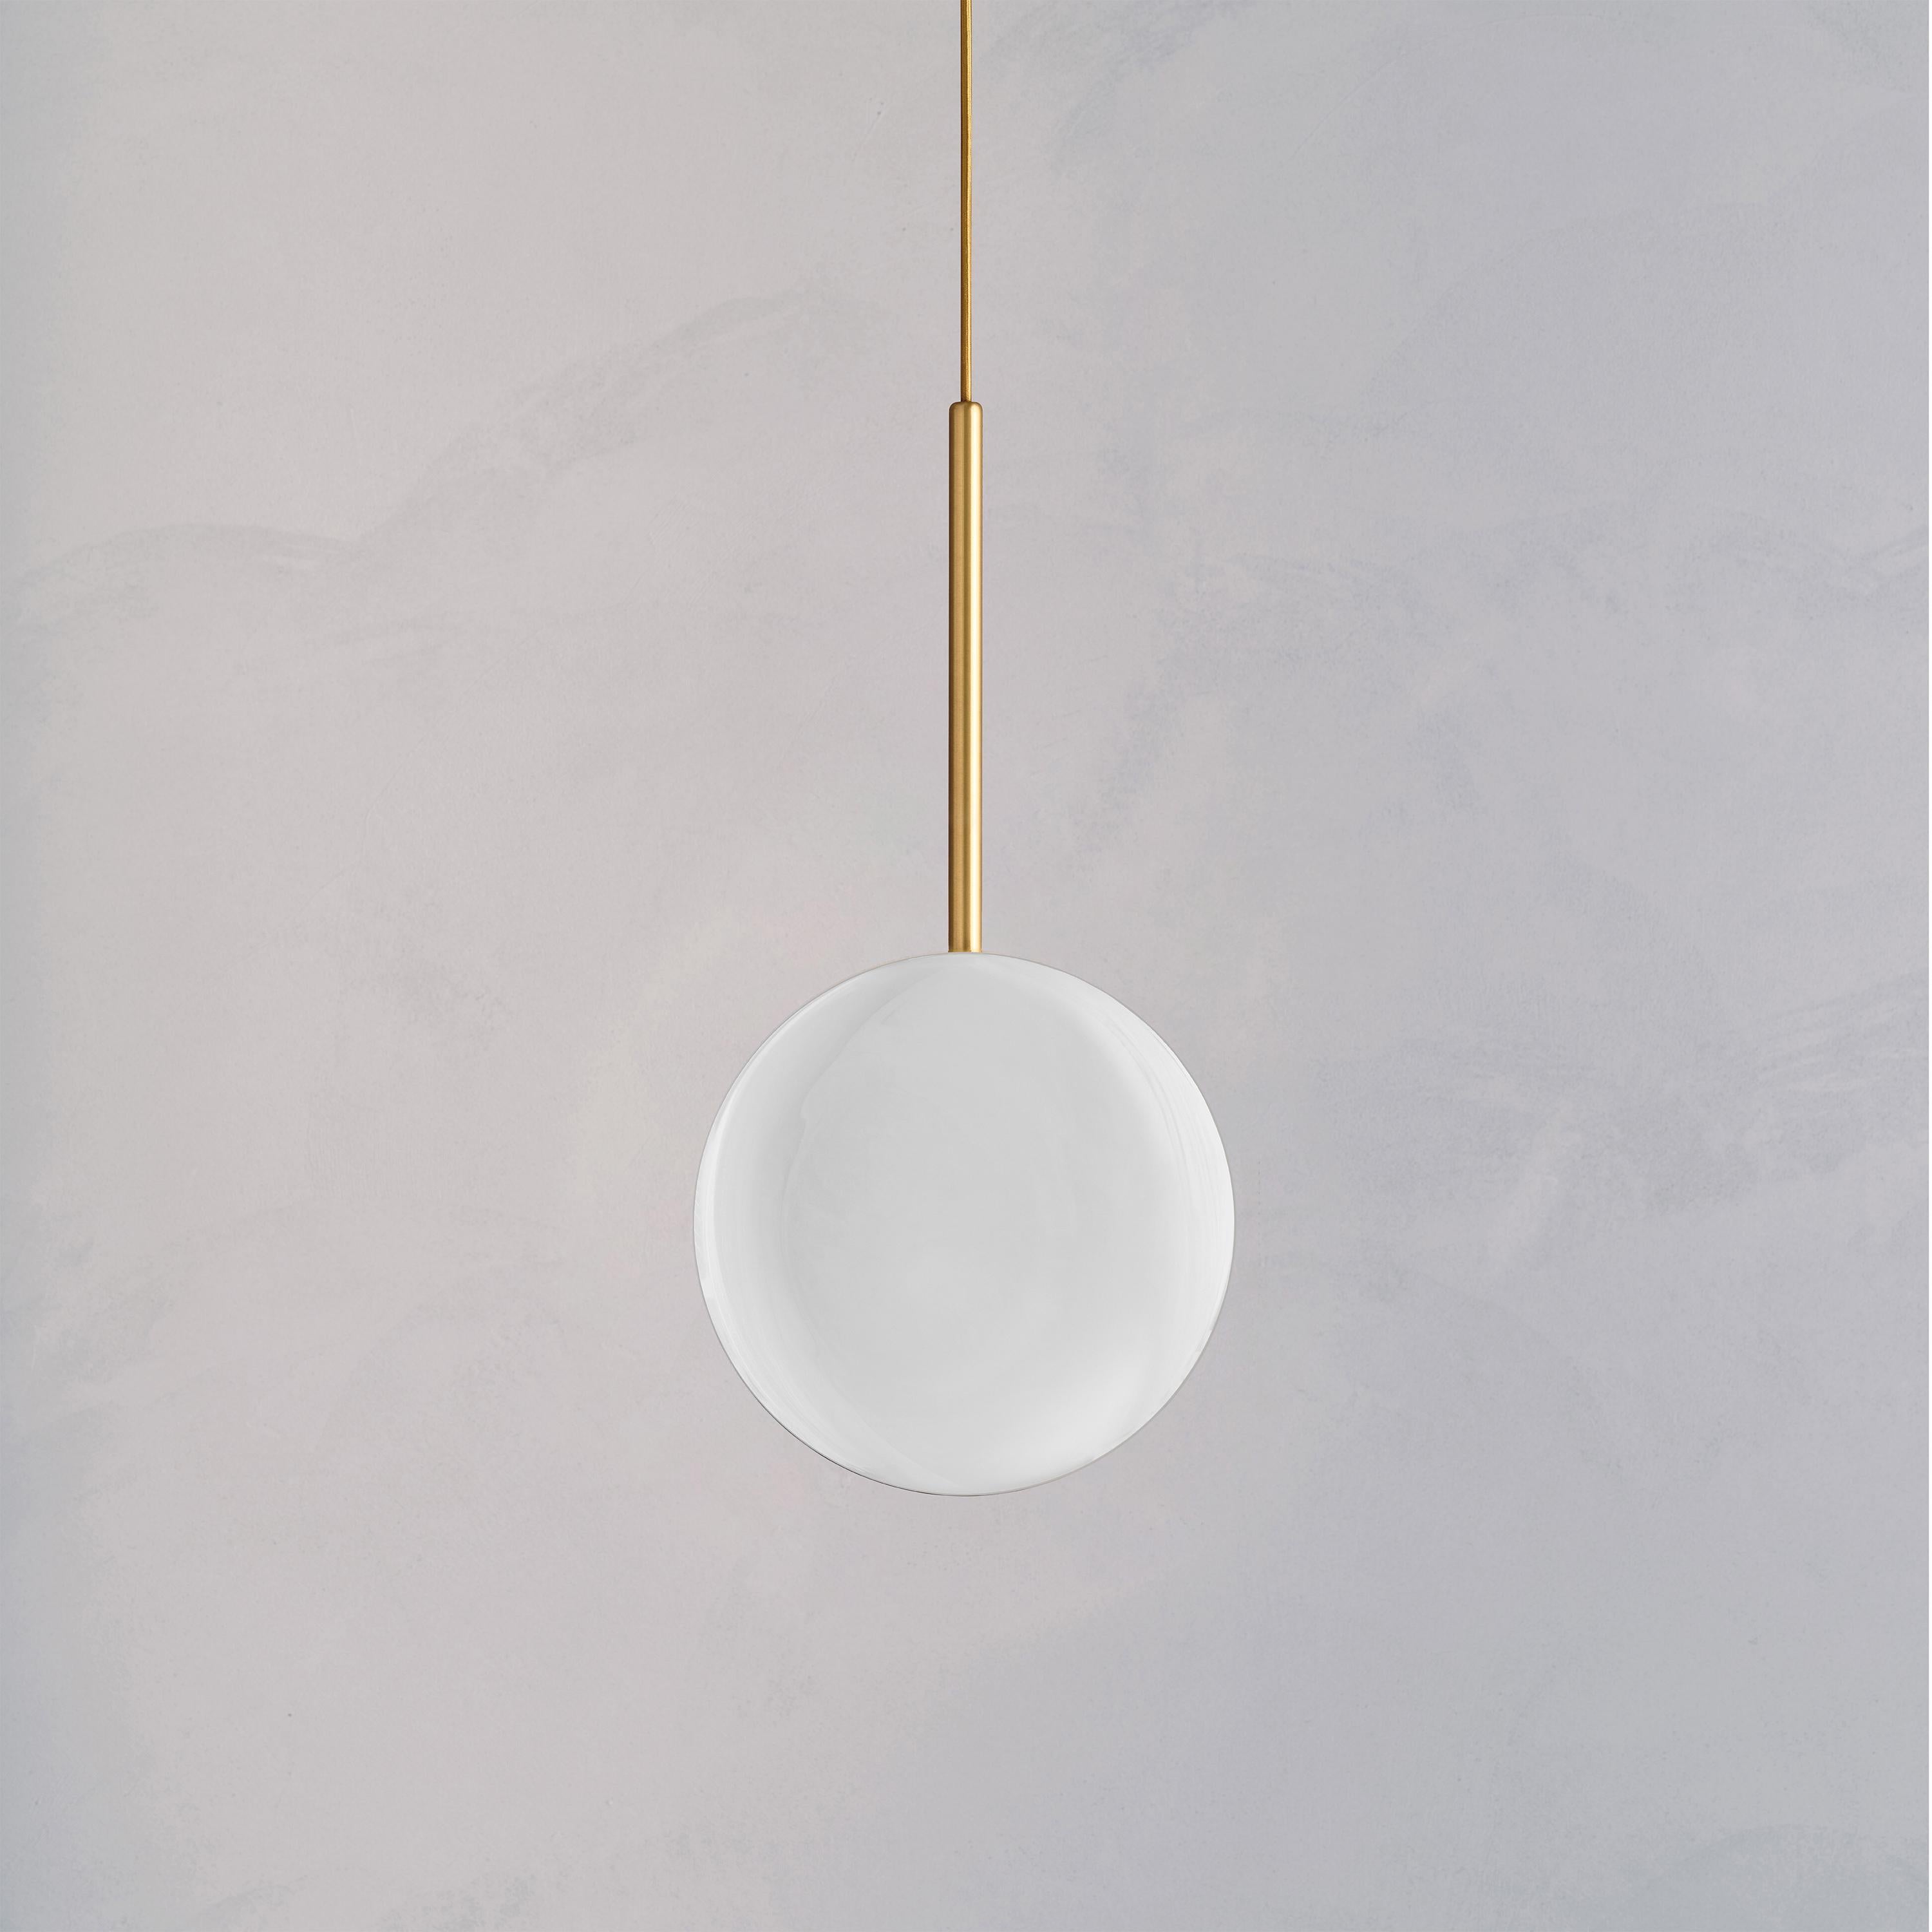 Organic Modern Cosmic 'Comet Pendant Purion' Handmade White Piano Lacquered Brass Ceiling Light For Sale